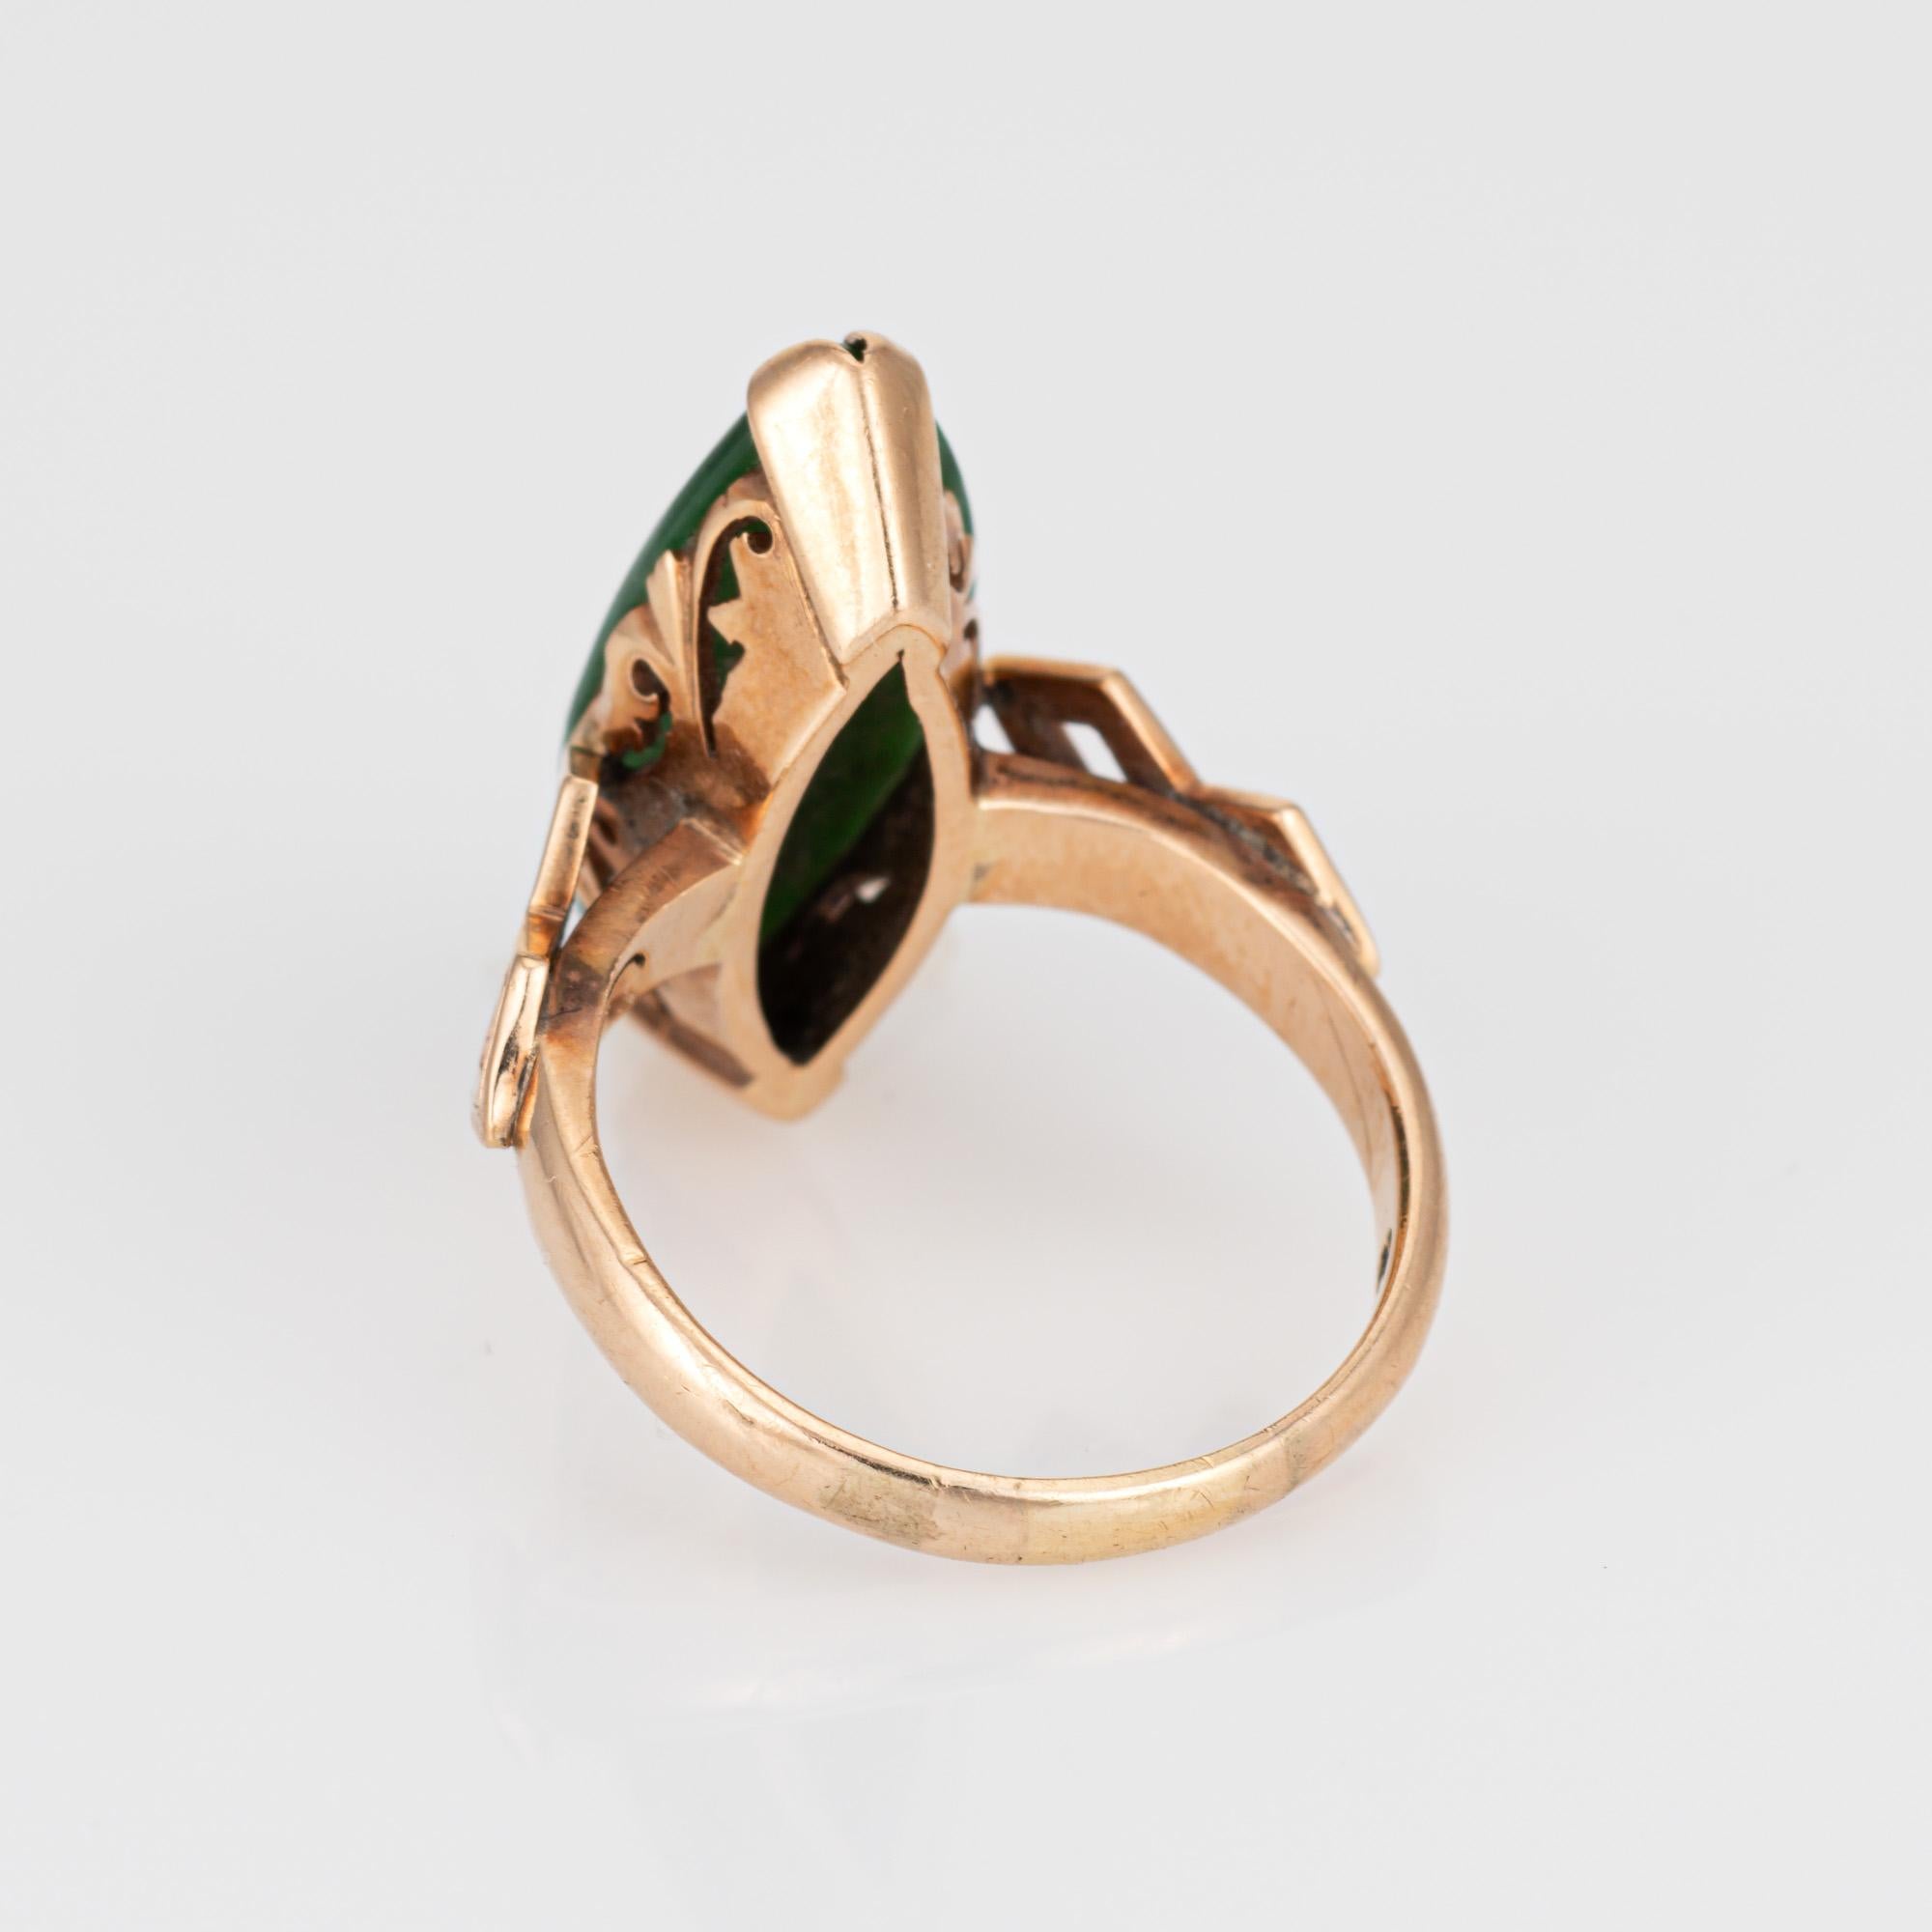 Stylish Vintage Jade Navette Style Cocktail Ring 'circa 1960s' Crafted in 14 Kar In Good Condition For Sale In Torrance, CA